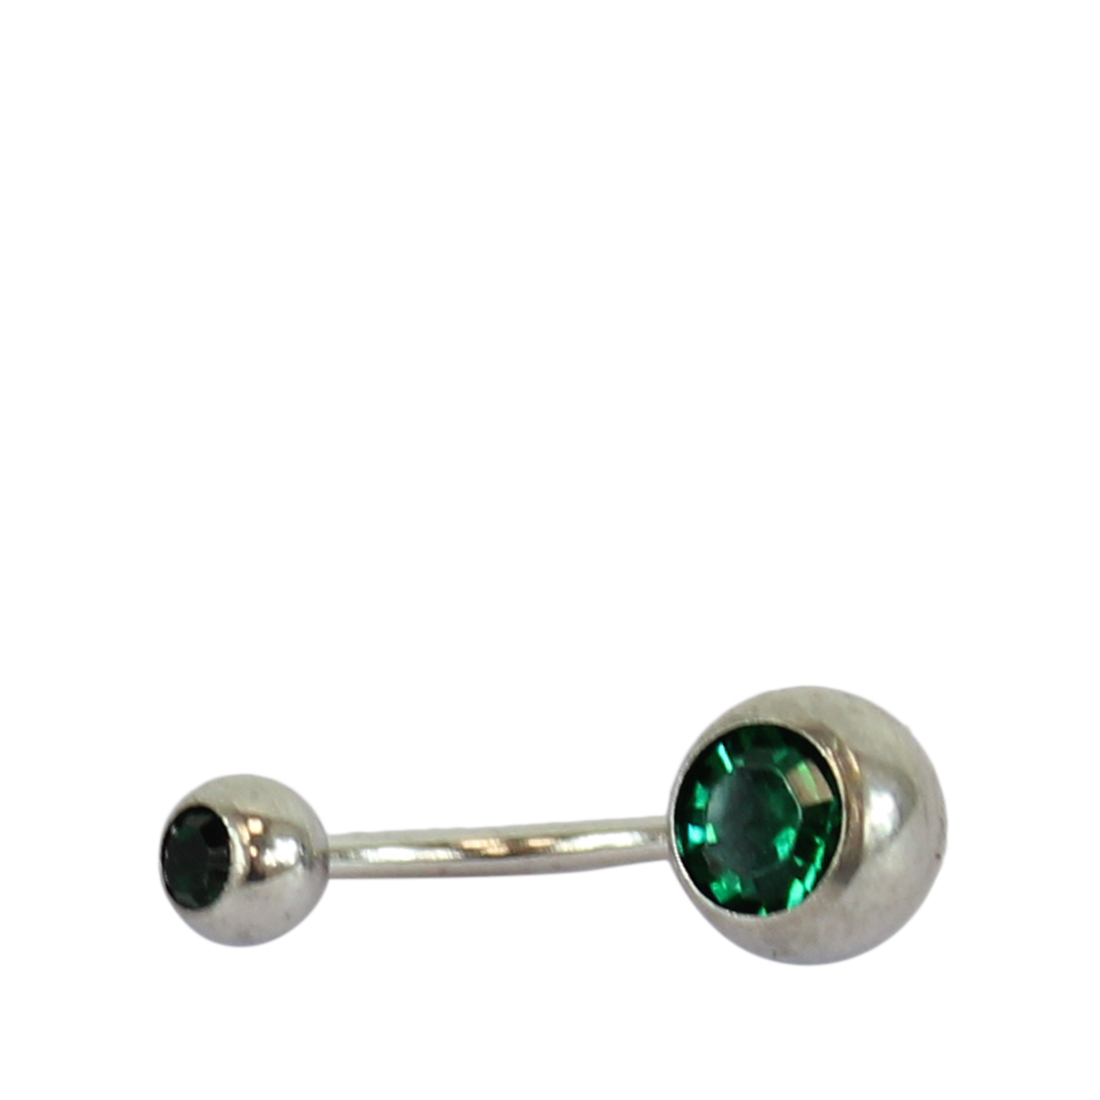 * Belly button ring with diamond